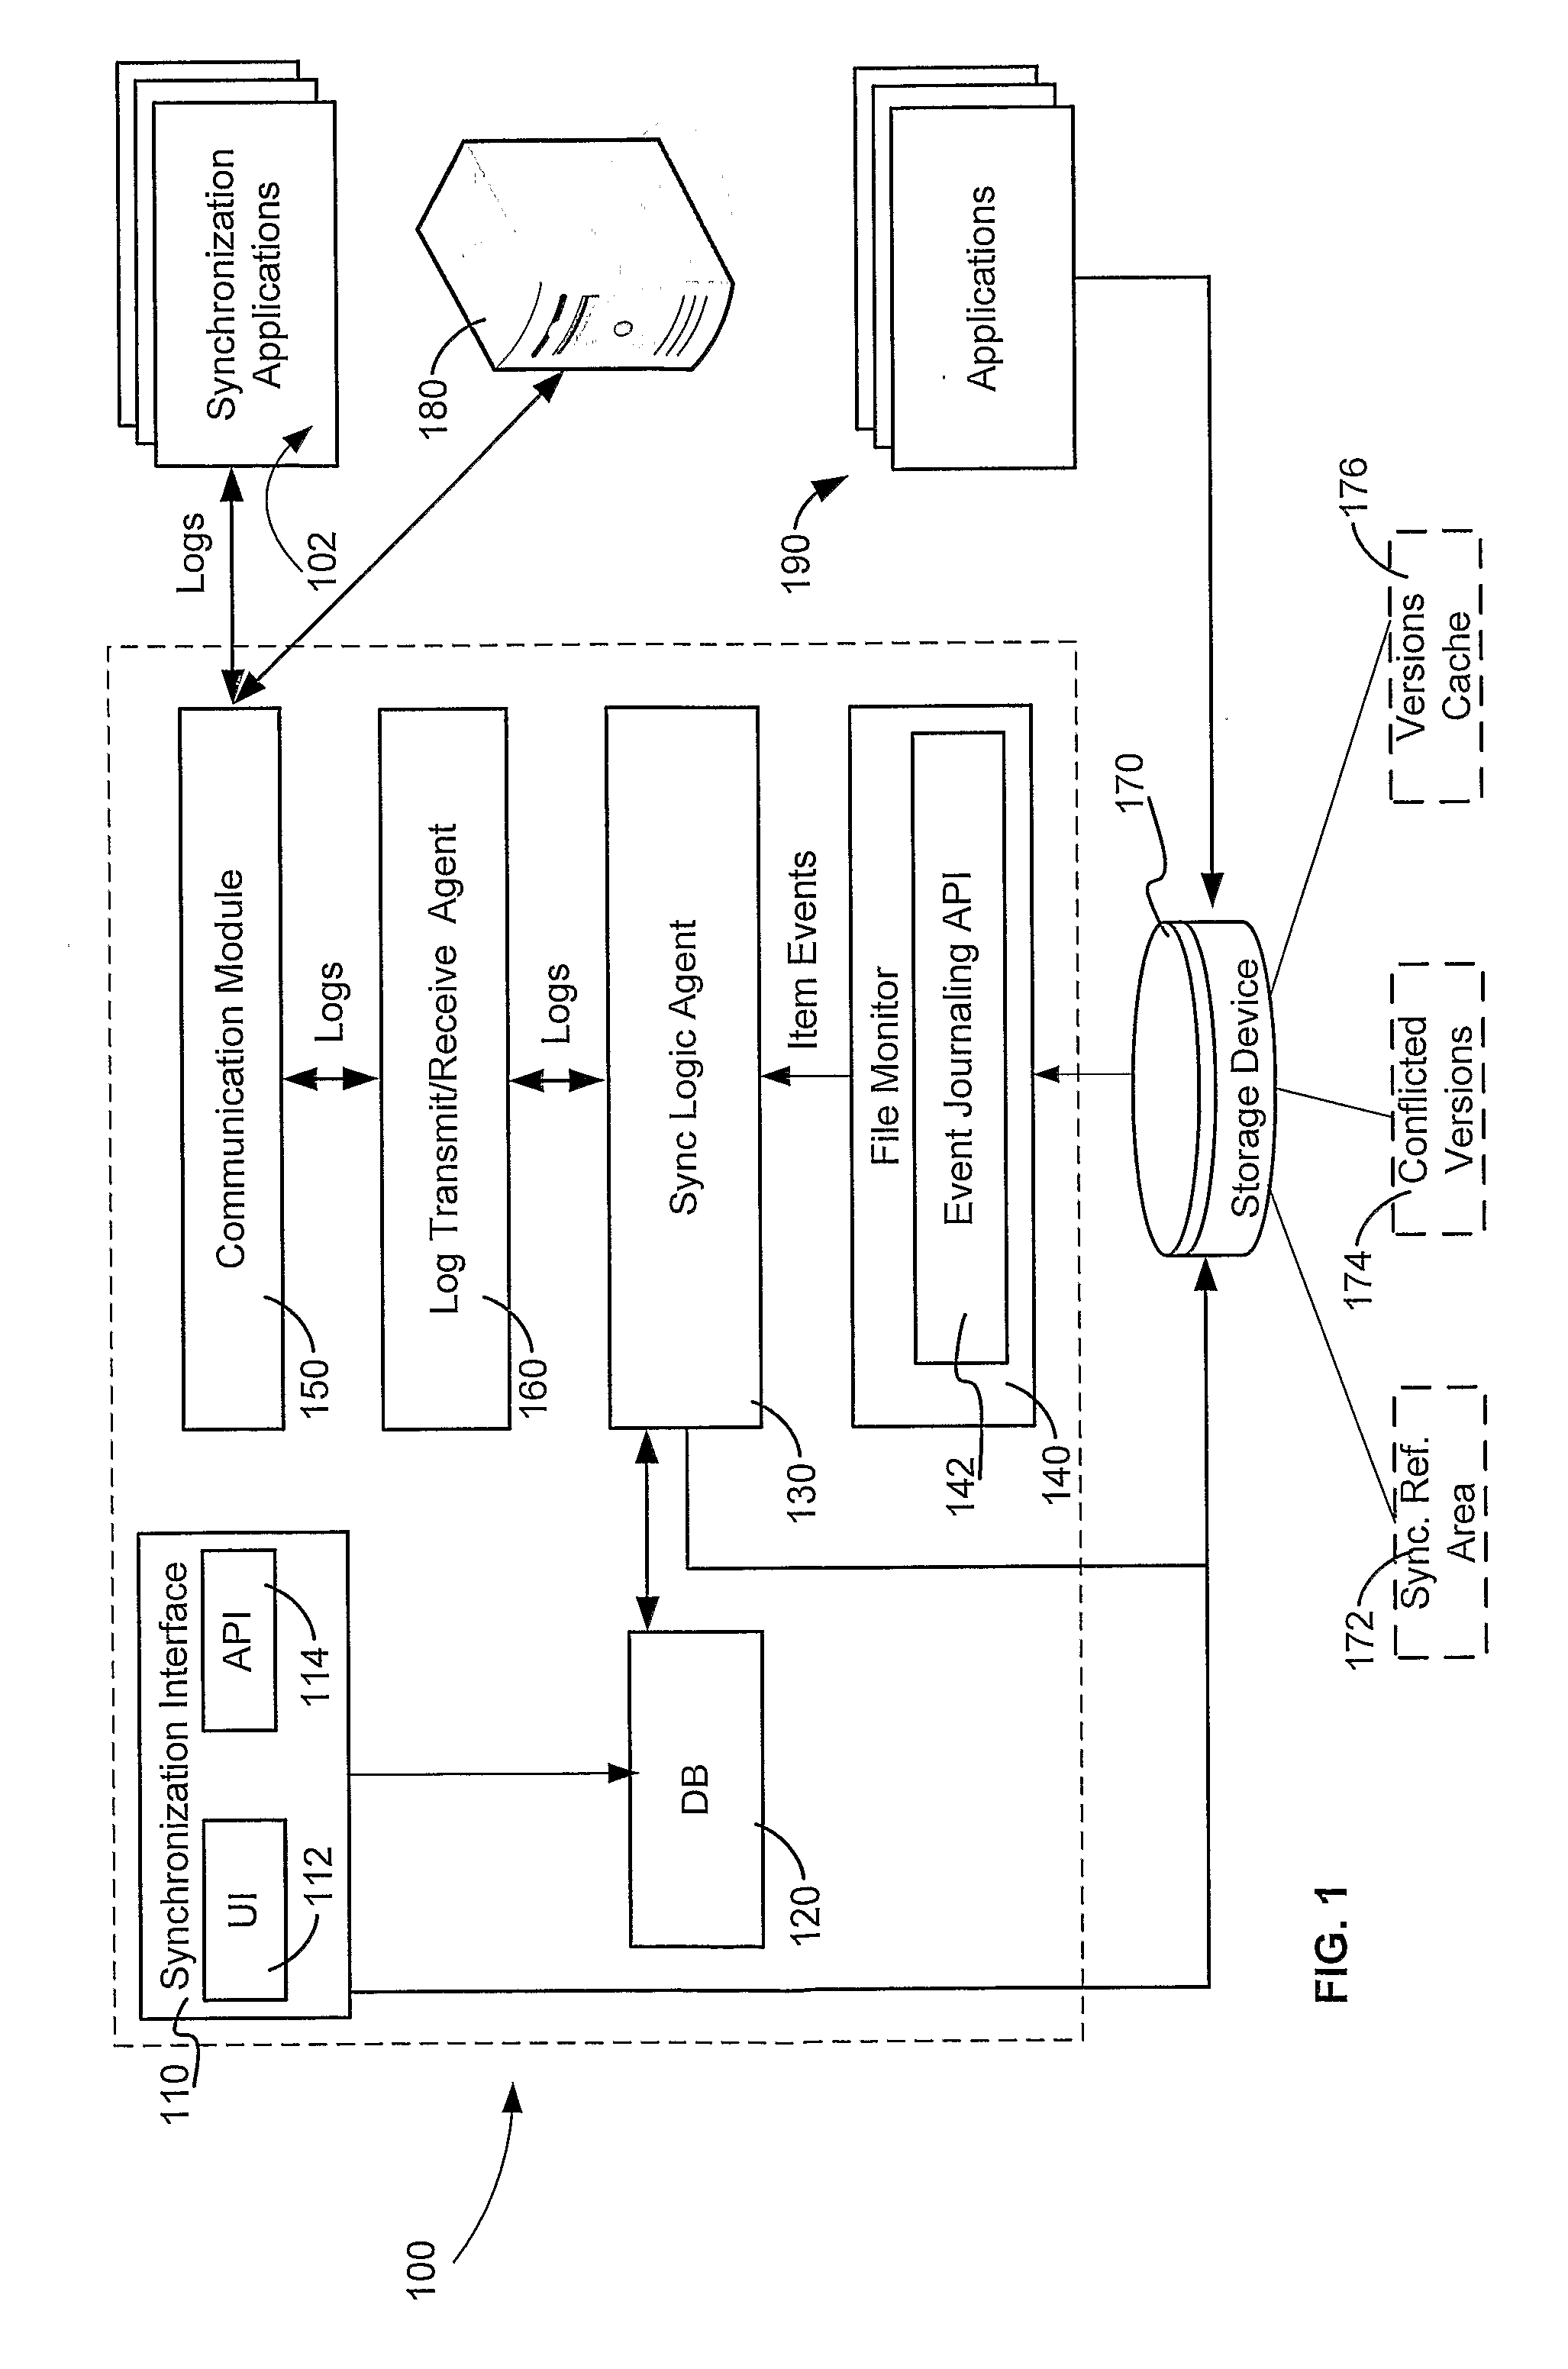 Peer to peer syncronization system and method